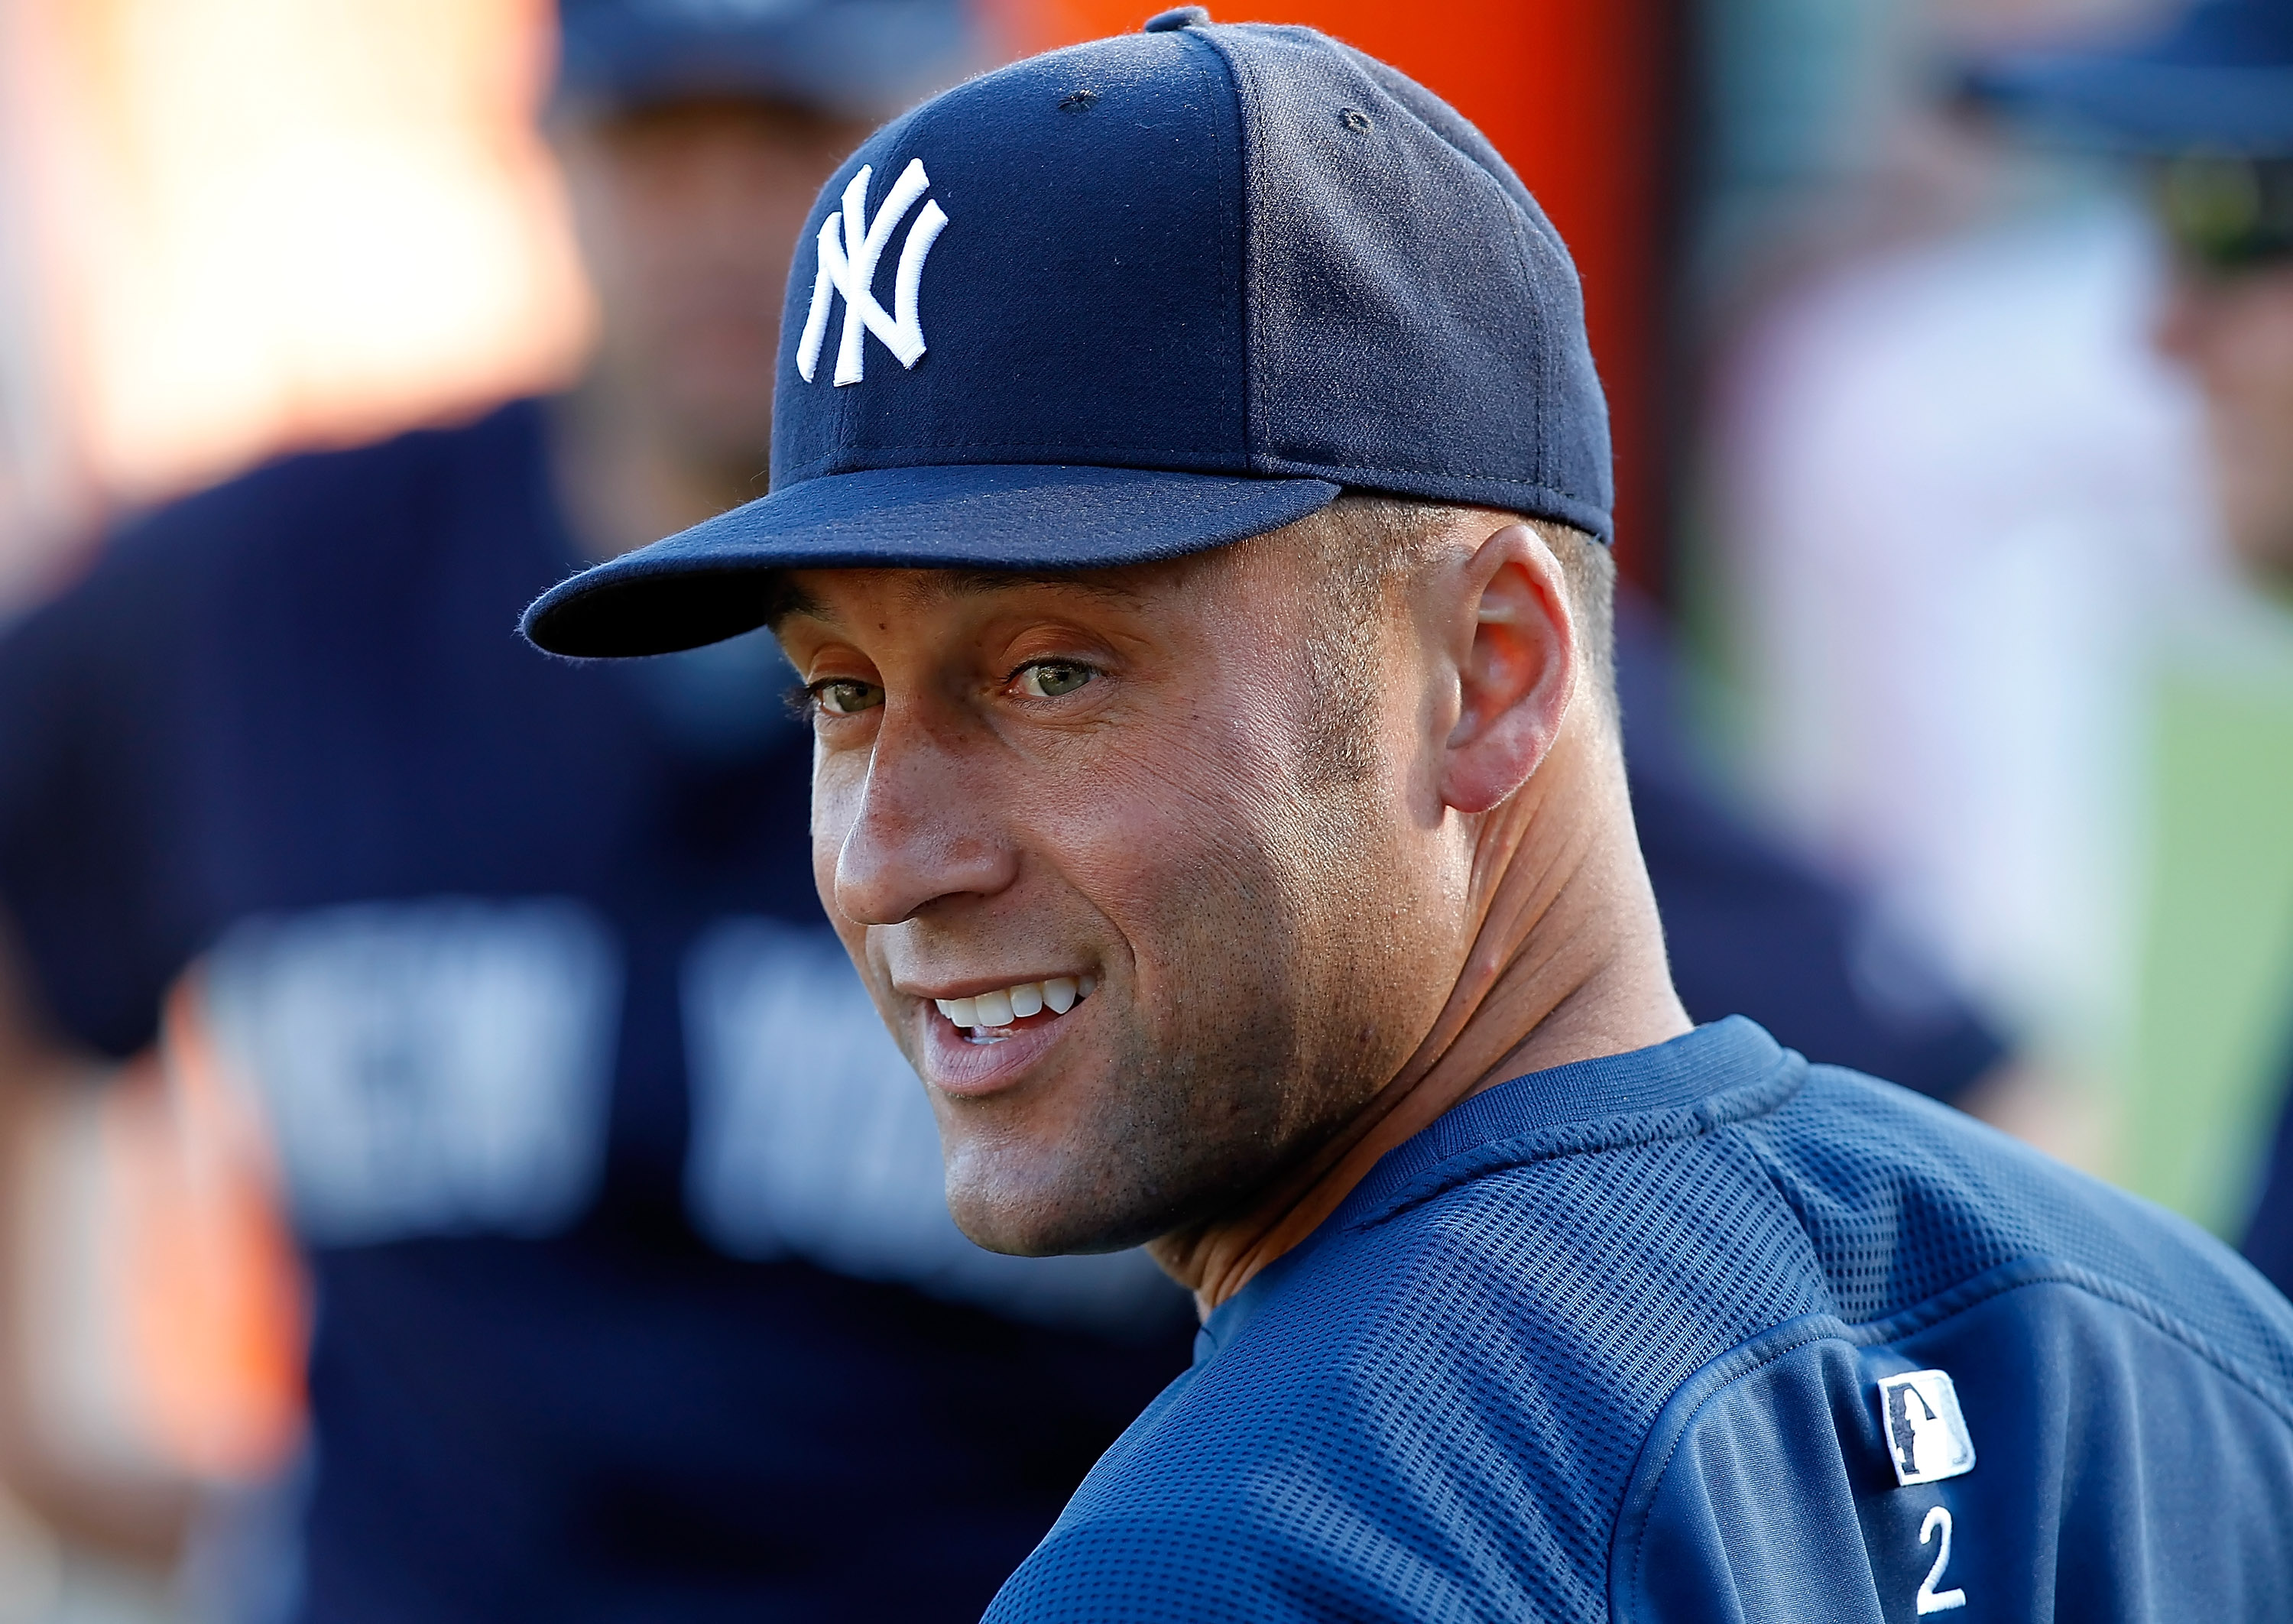 SARASOTA, FL - MARCH 07:  Infielder Derek Jeter #2 of the New York Yankees warms up just prior to the start of the Grapefruit League Spring Training Game against the Baltimore Orioles at Ed Smith Stadium on March 7, 2011 in Sarasota, Florida.  (Photo by J